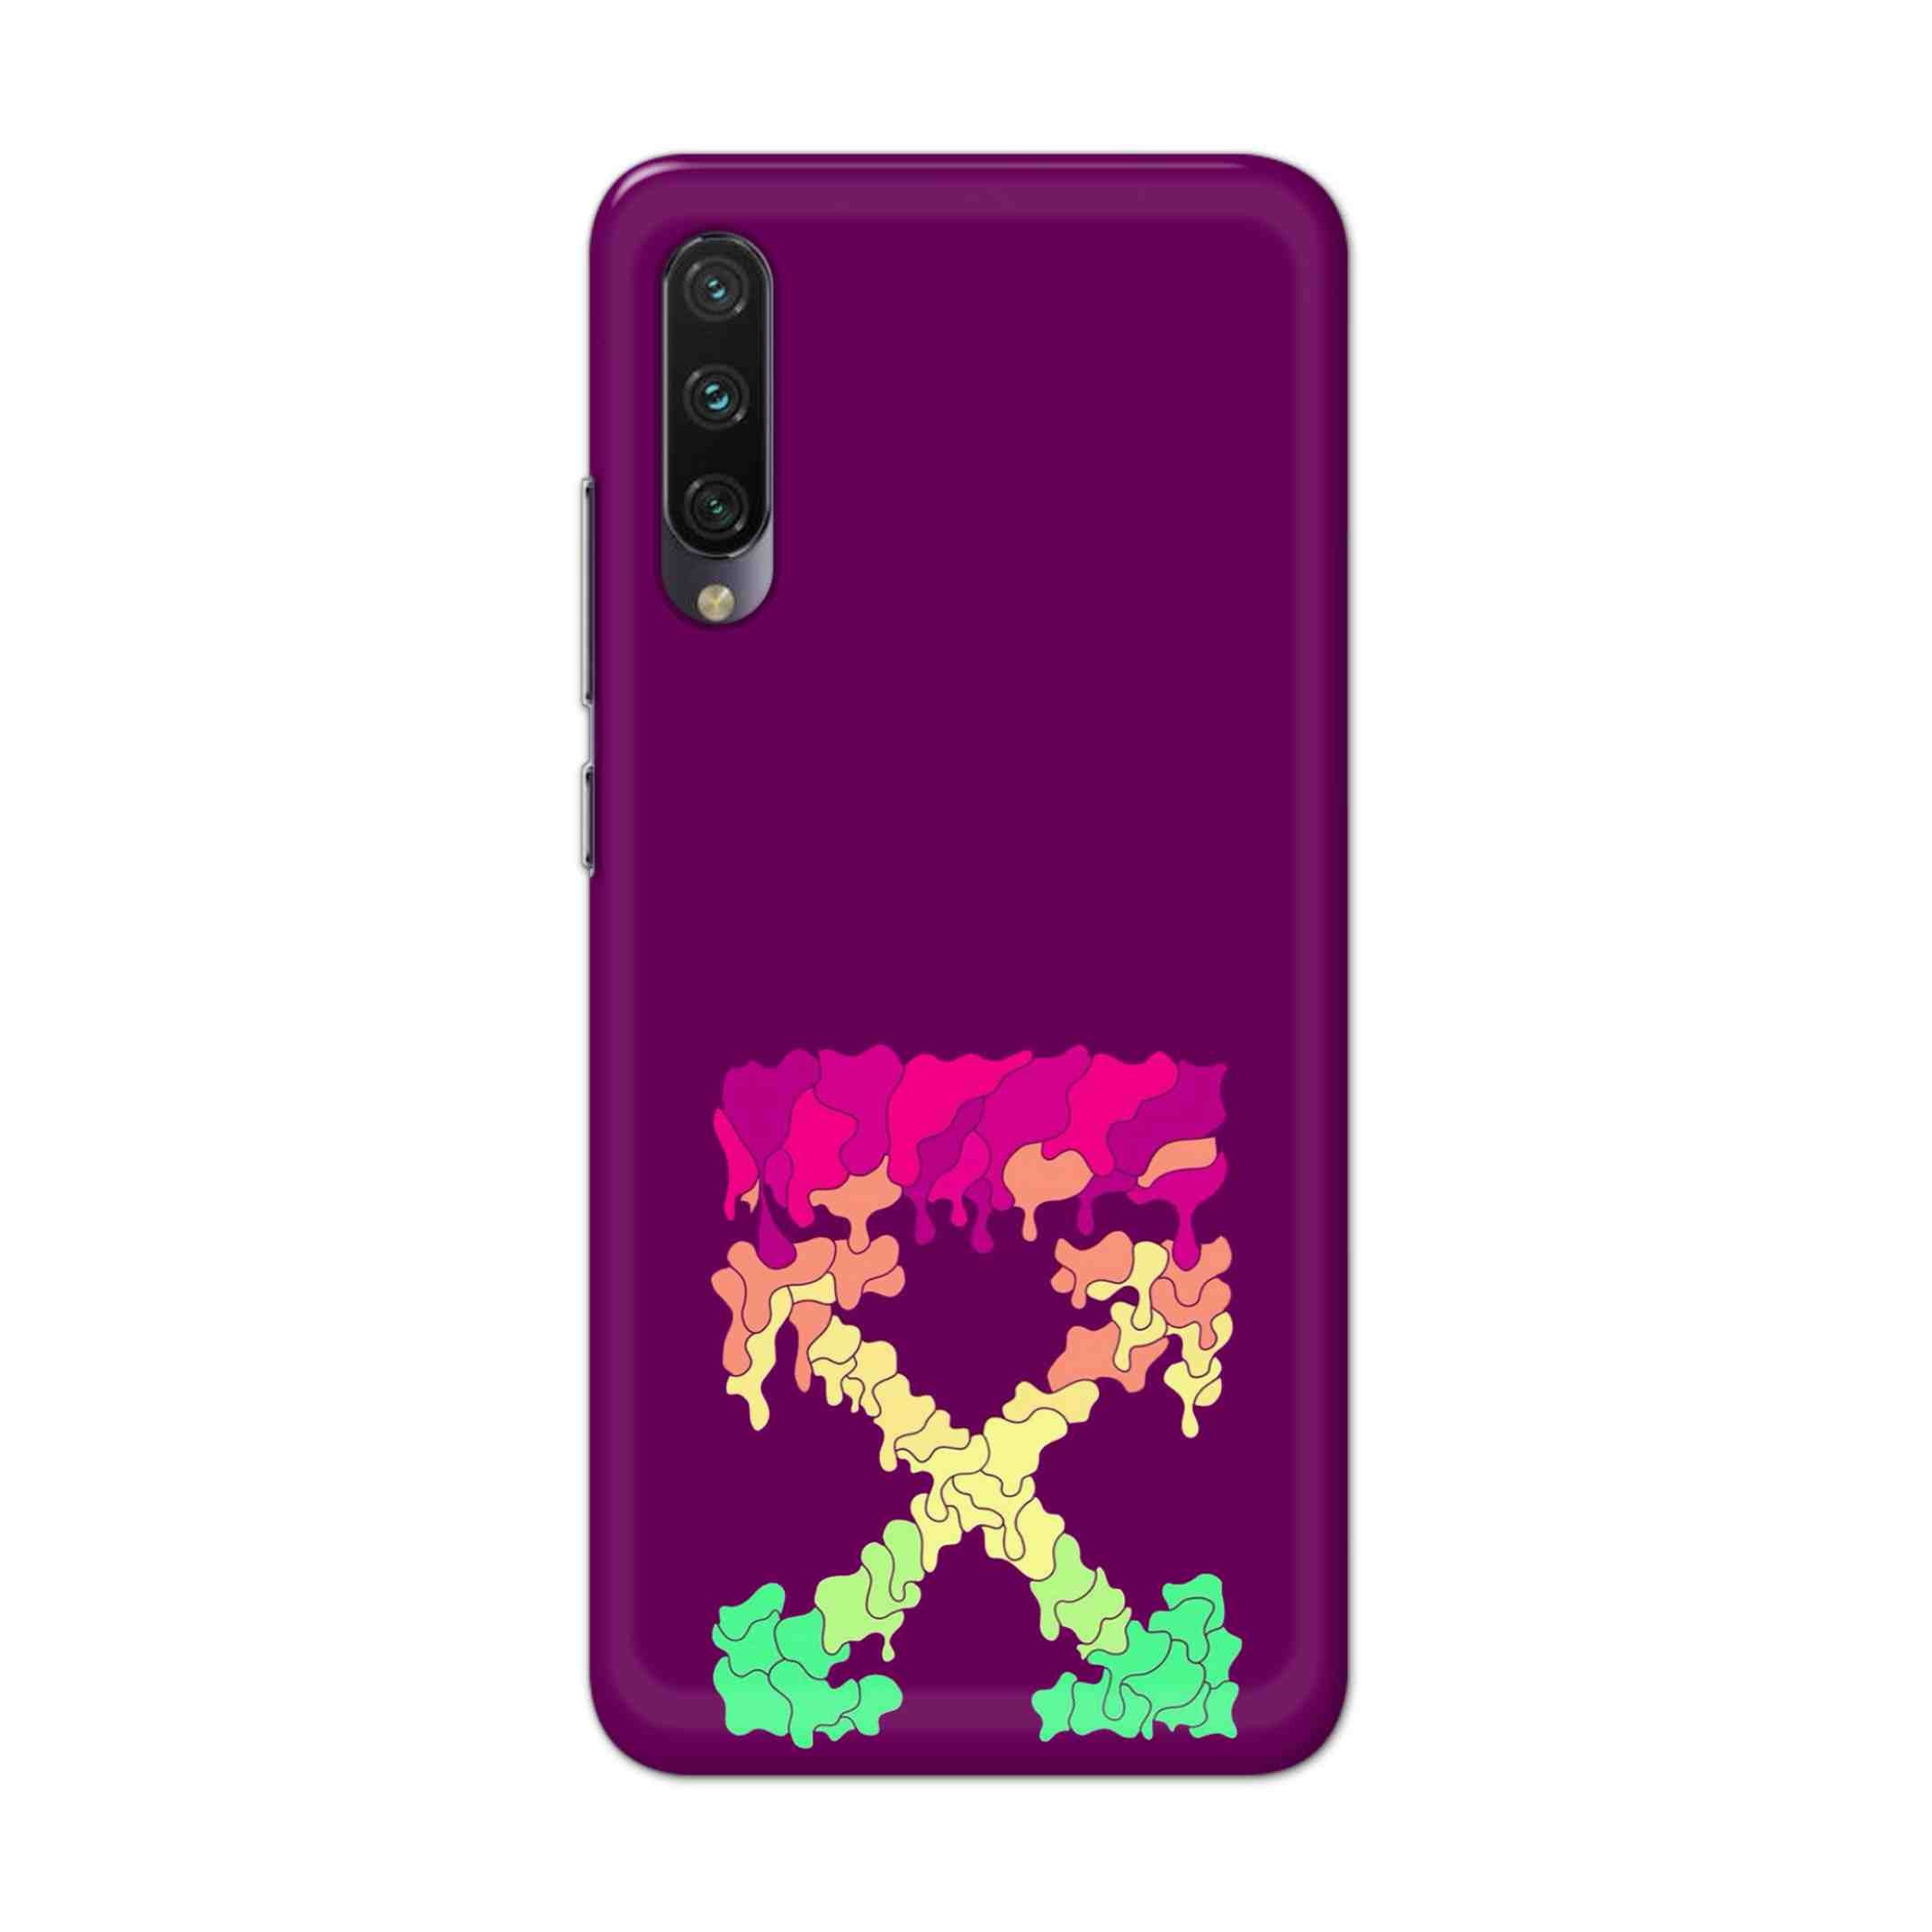 Buy X.O Hard Back Mobile Phone Case Cover For Xiaomi Mi A3 Online